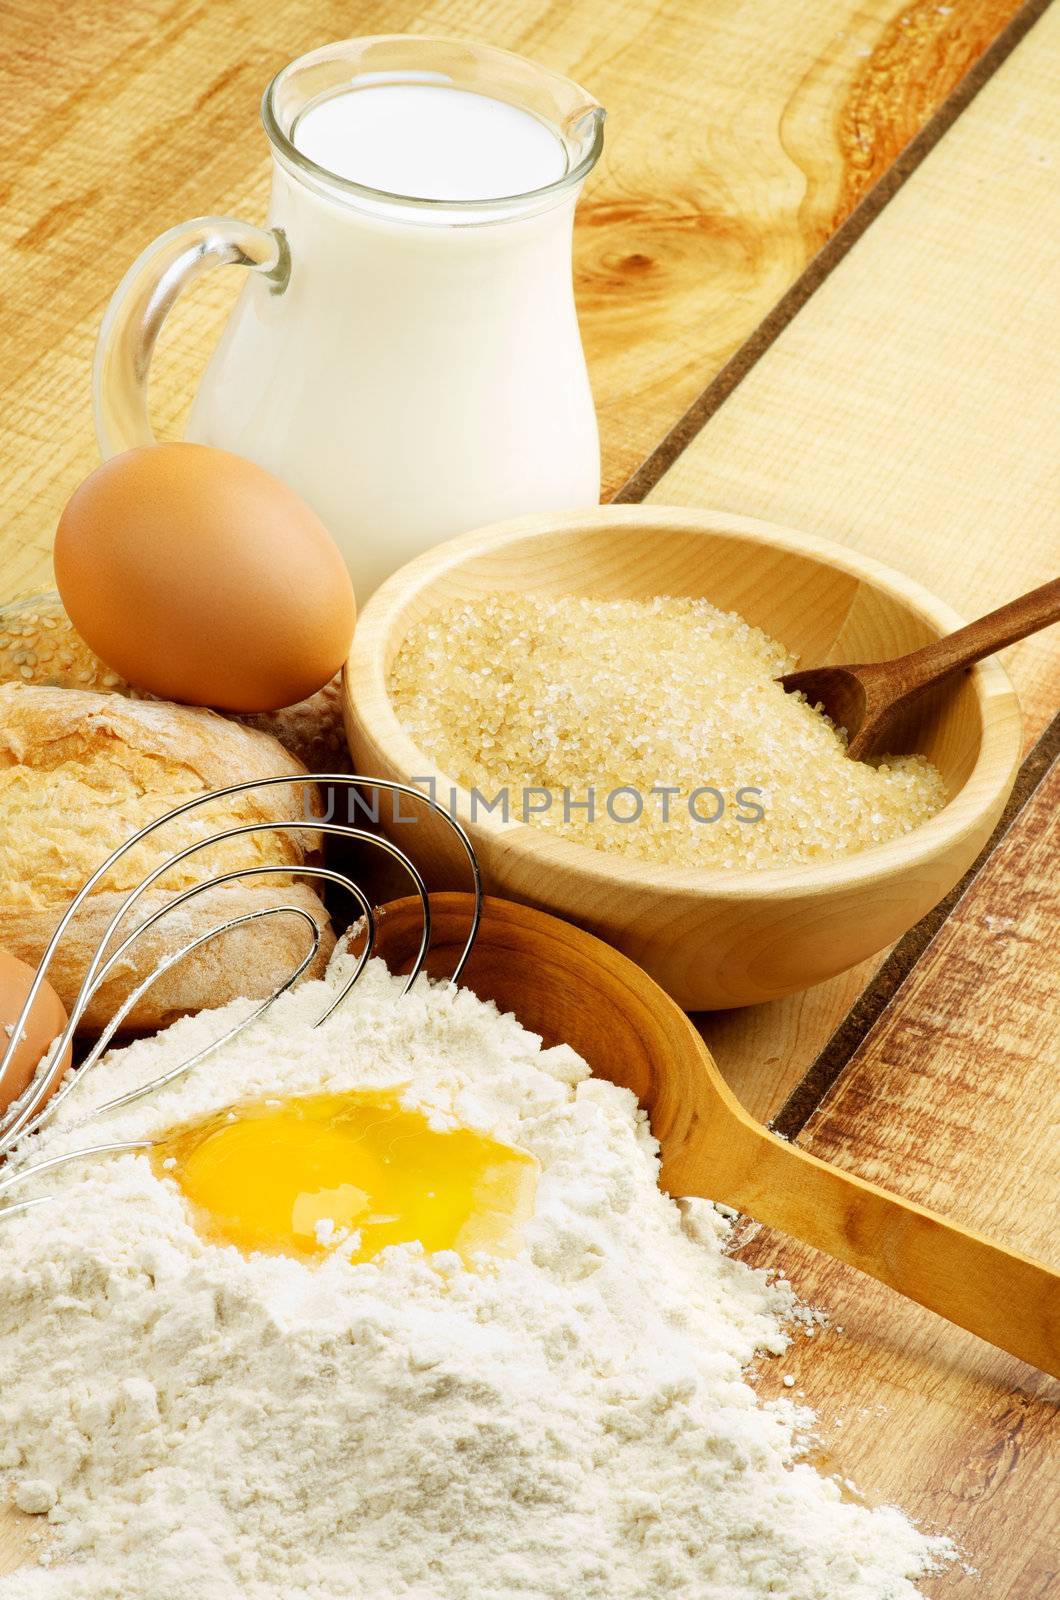 Preparing Dough. Ingredients with Jar of Milk, Flour, Egg, Sugar and Wooden Spoon with Egg Whisk closeup on Wooden background